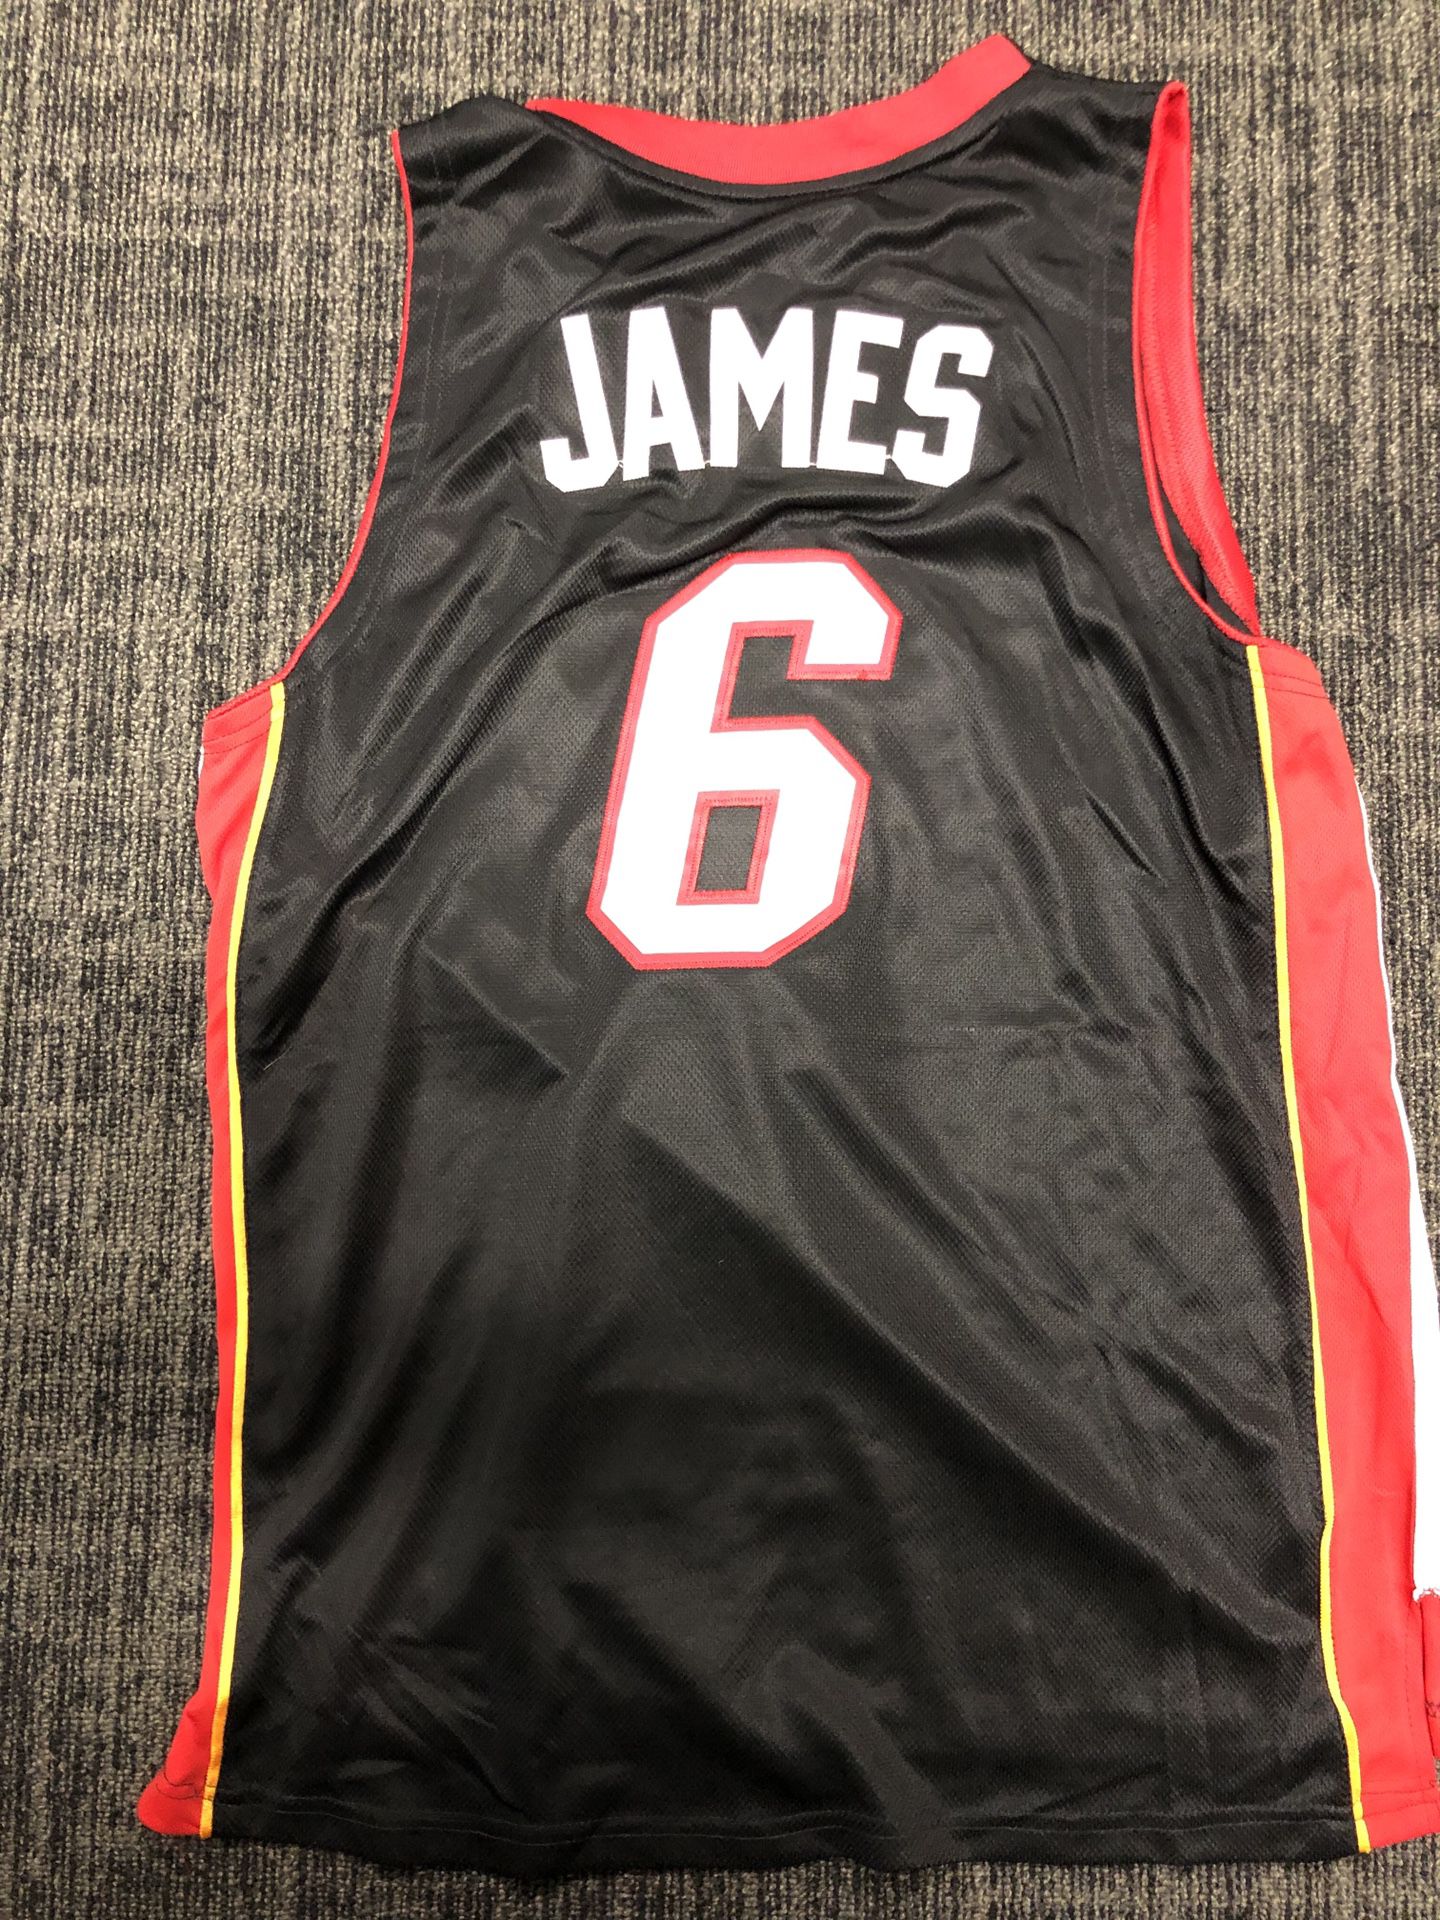 Lebron James Miami Heat Jersey - Black, Medium for Sale in Osseo, MN -  OfferUp